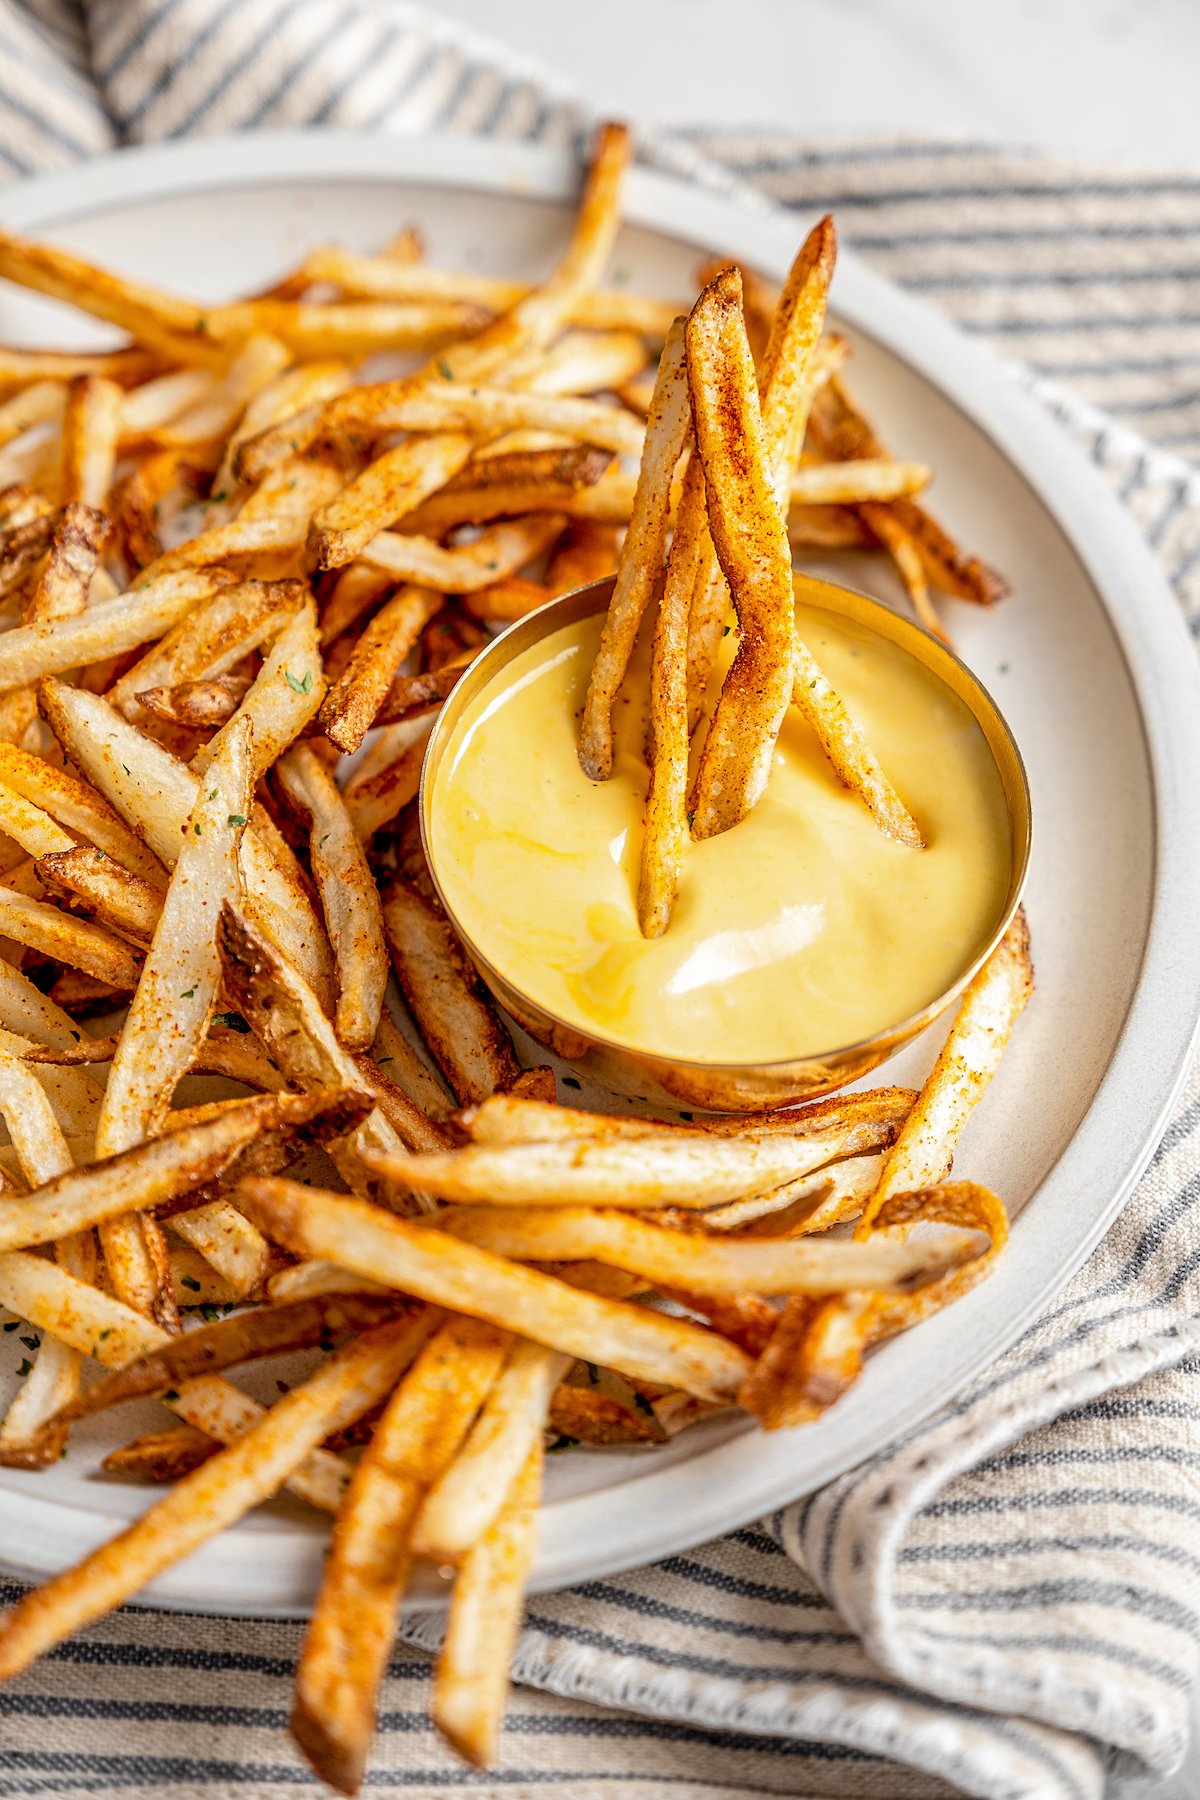 Plate of shoestring fries with dipping sauce